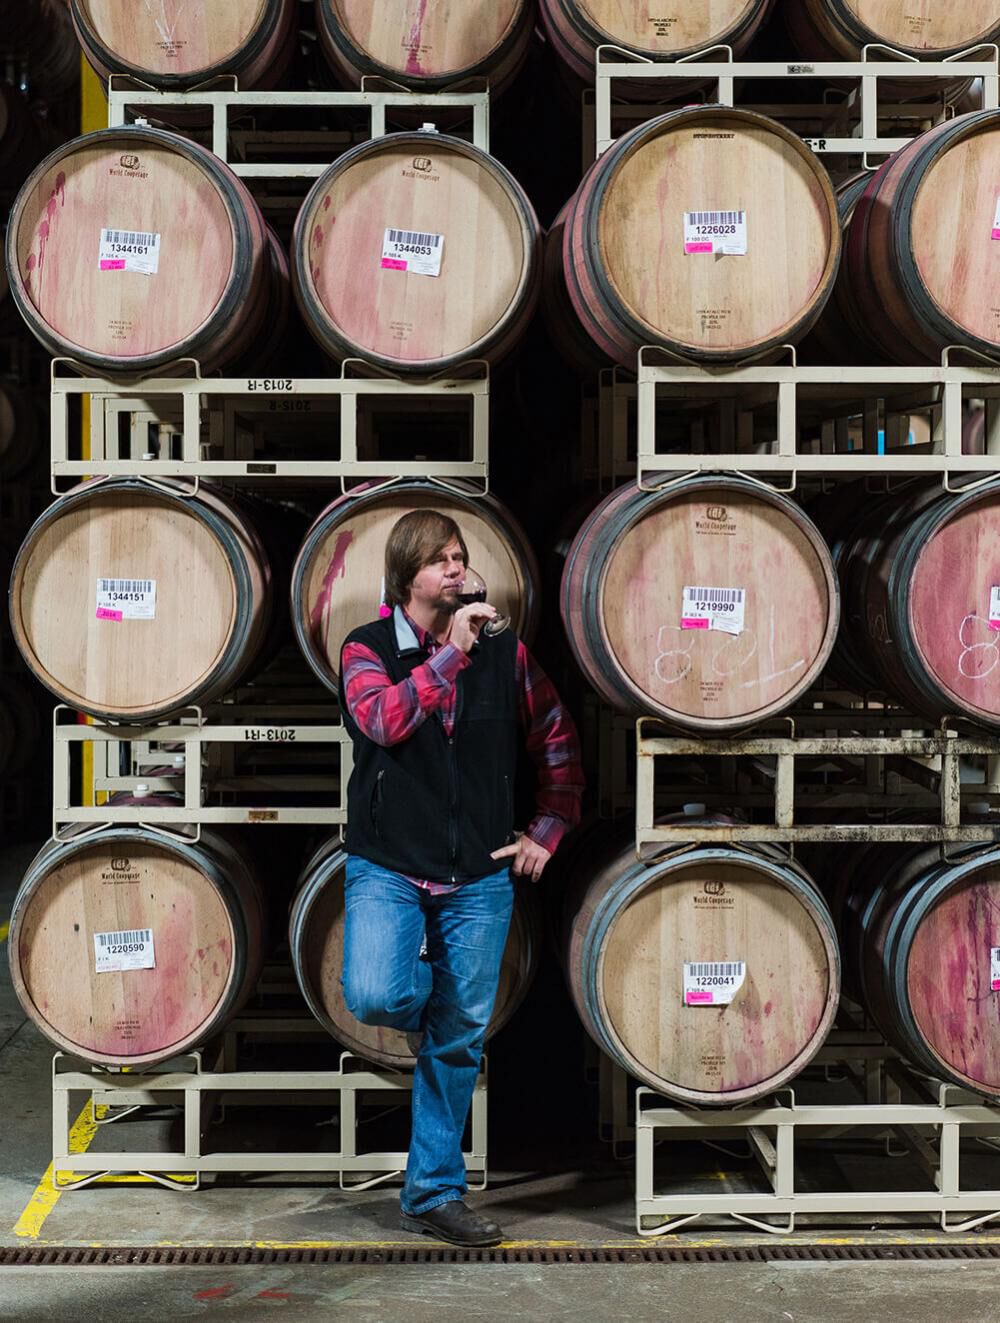 Murphy-Goode Winemaker, Dave Ready JR., standing in barrel room with a glass of wine.